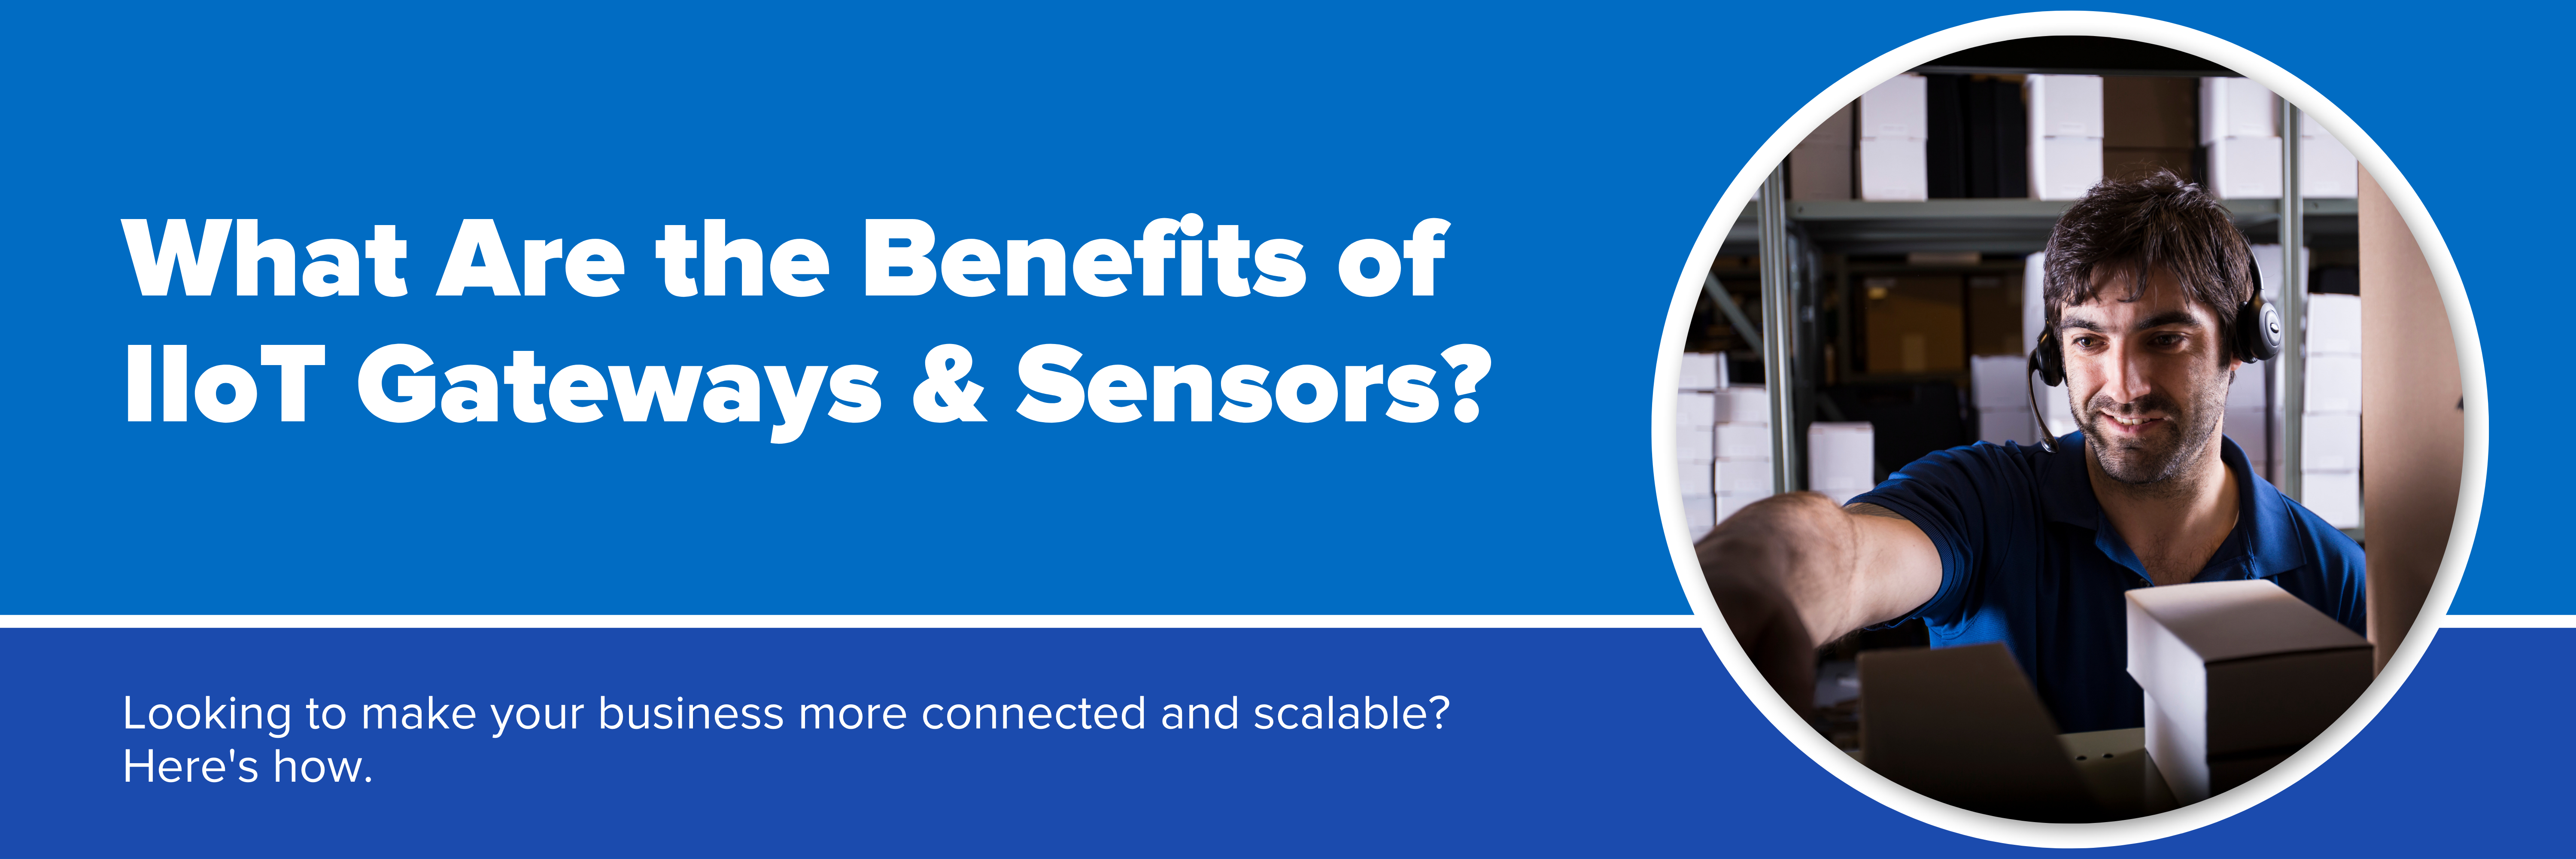 Header image with text "What Are the Benefits of IIoT Gateways & Sensors?"